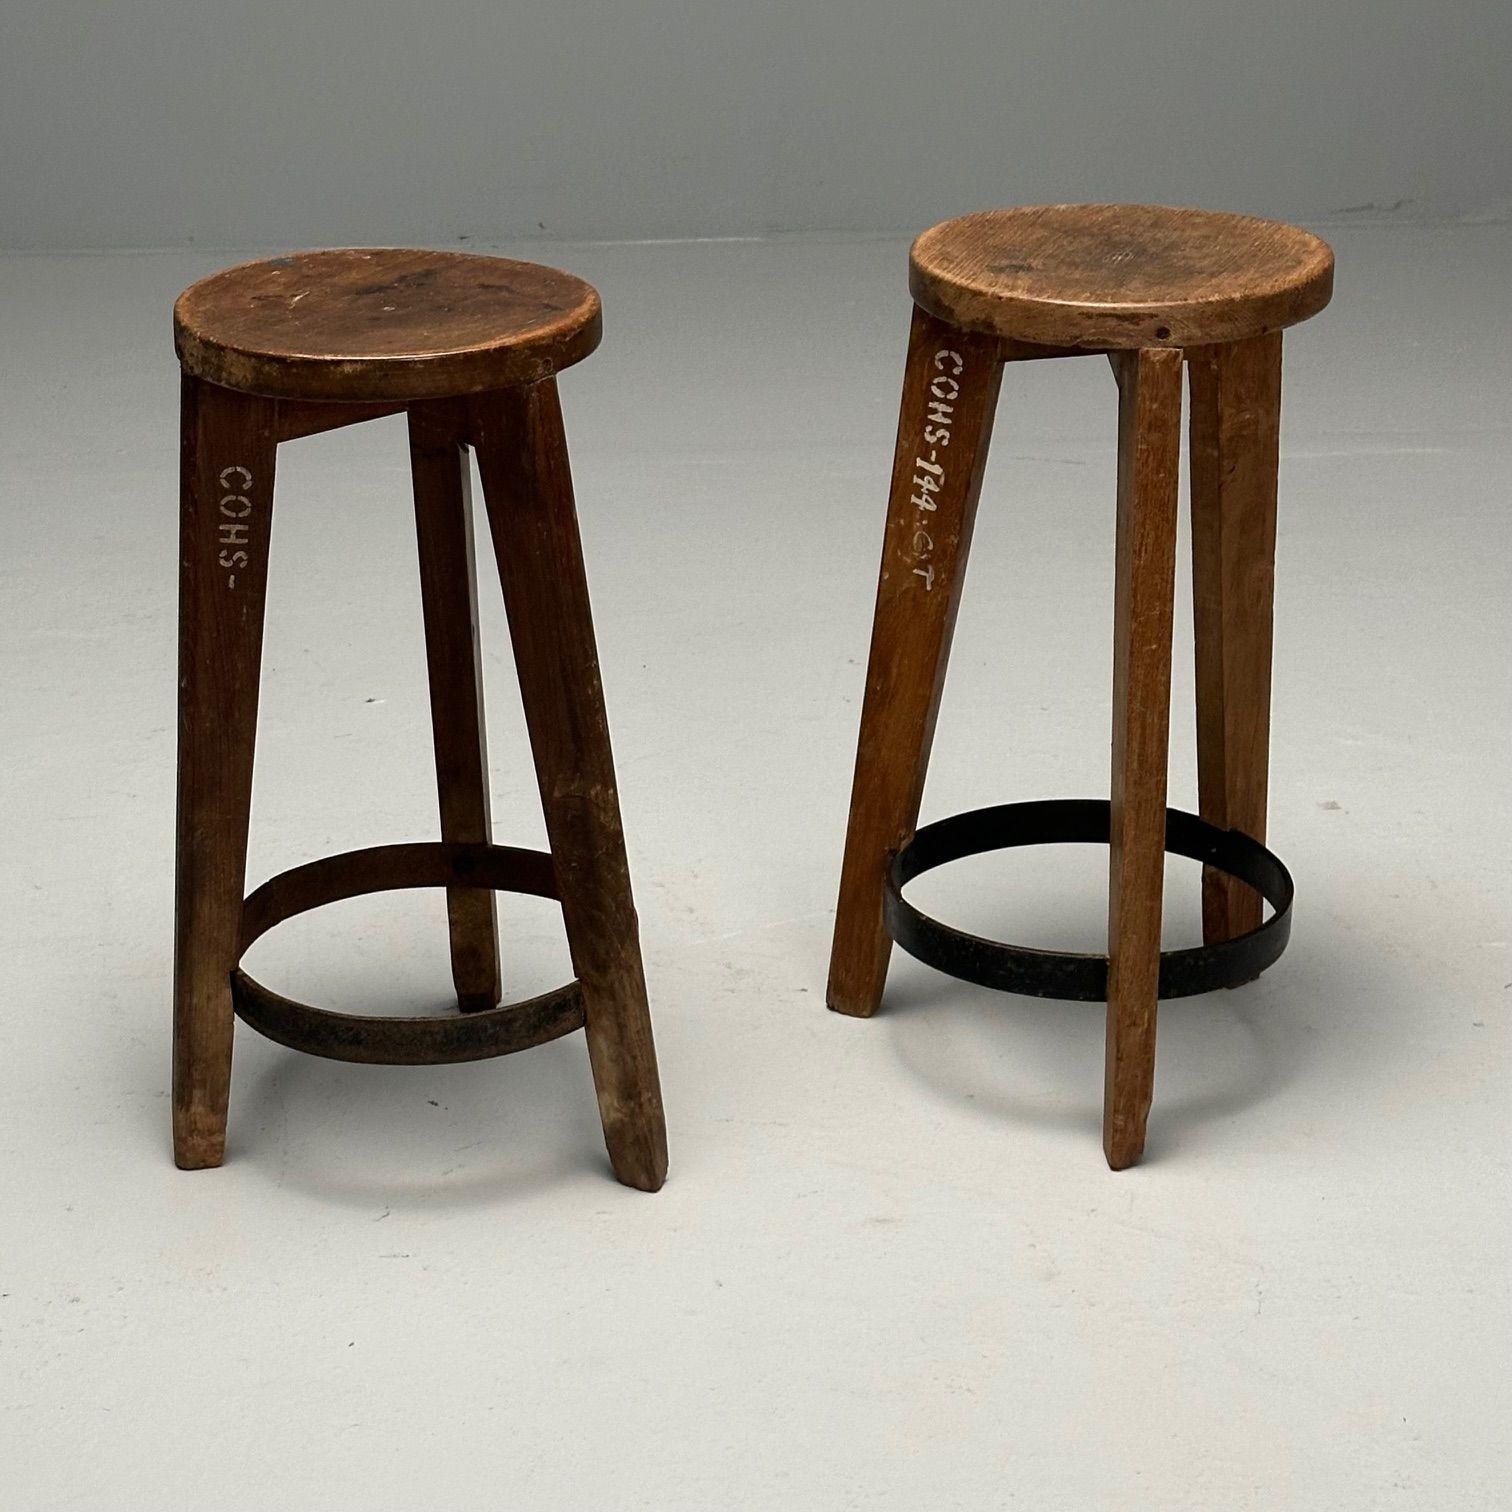 Pierre Jeanneret, French Mid-Century Modern, High Stools, Teak, Chandigarh In Good Condition For Sale In Stamford, CT